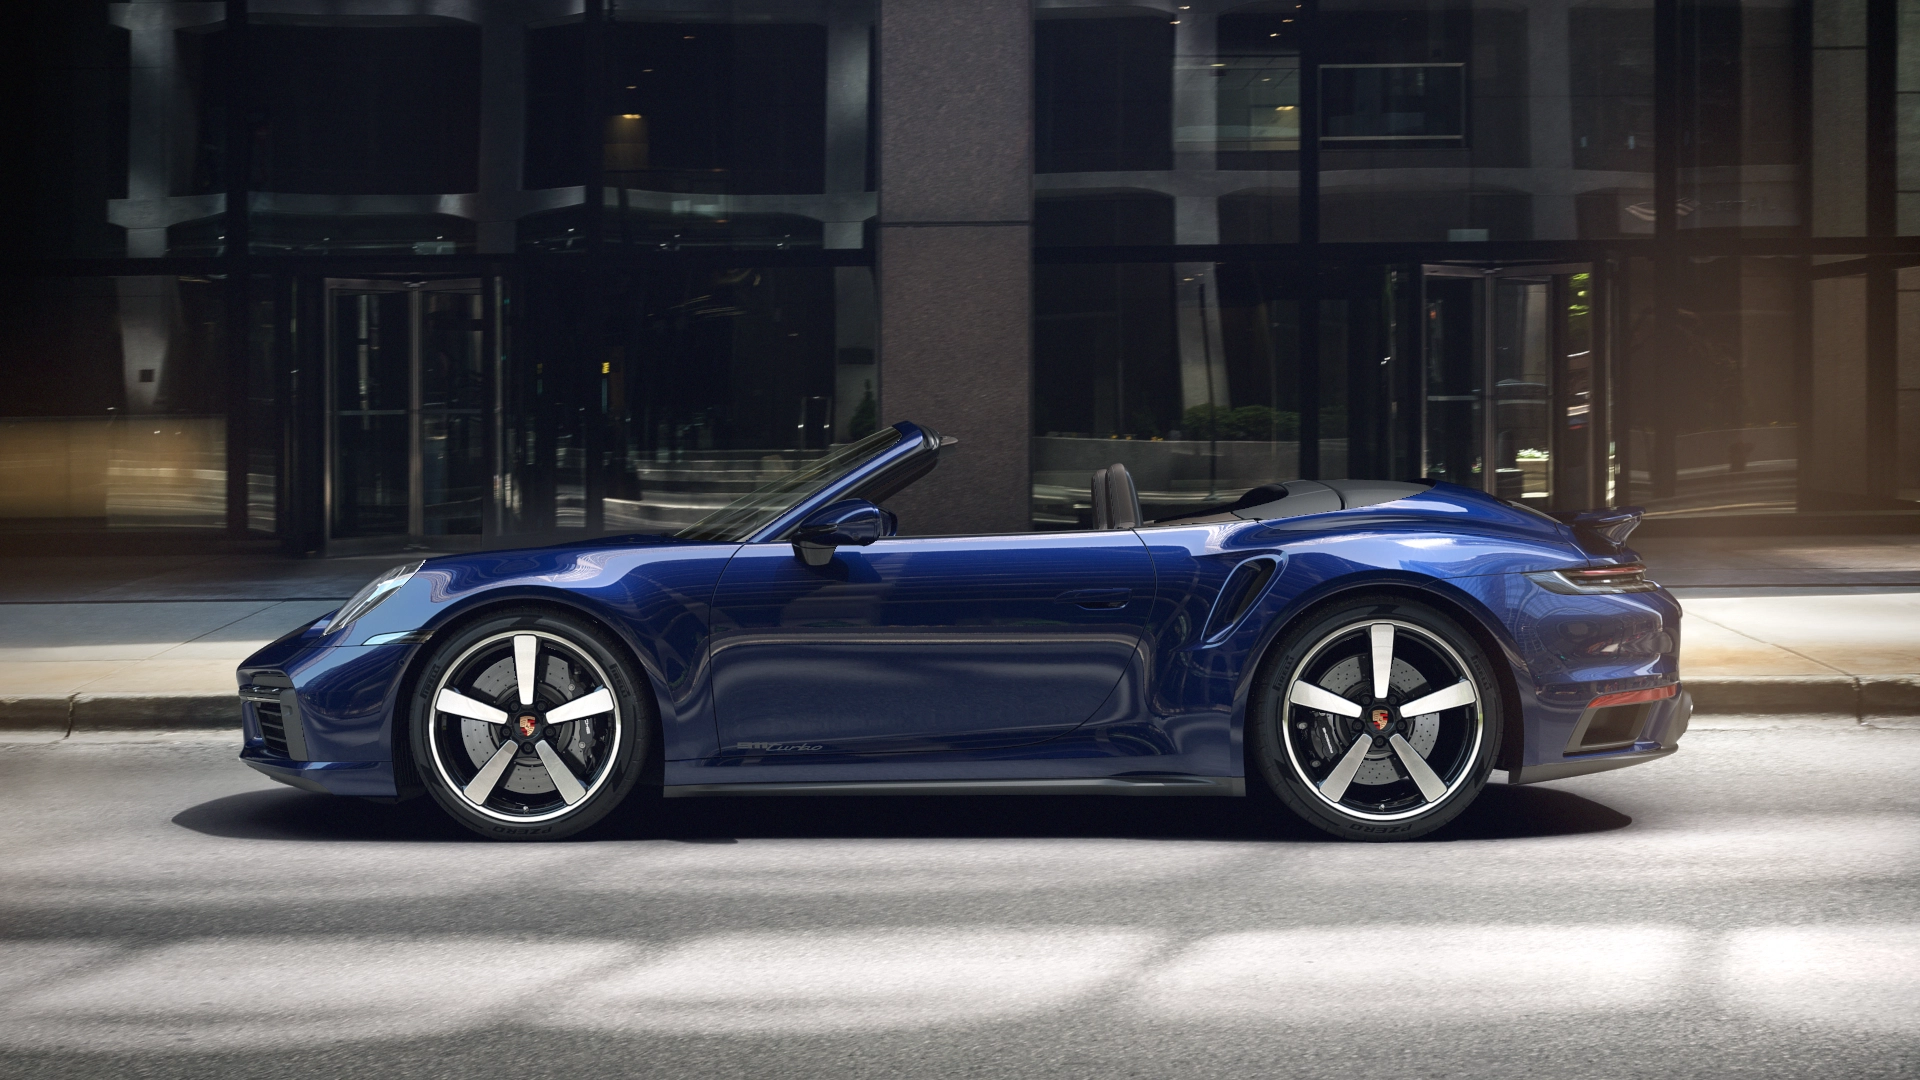 911 Turbo Cabriolet side view